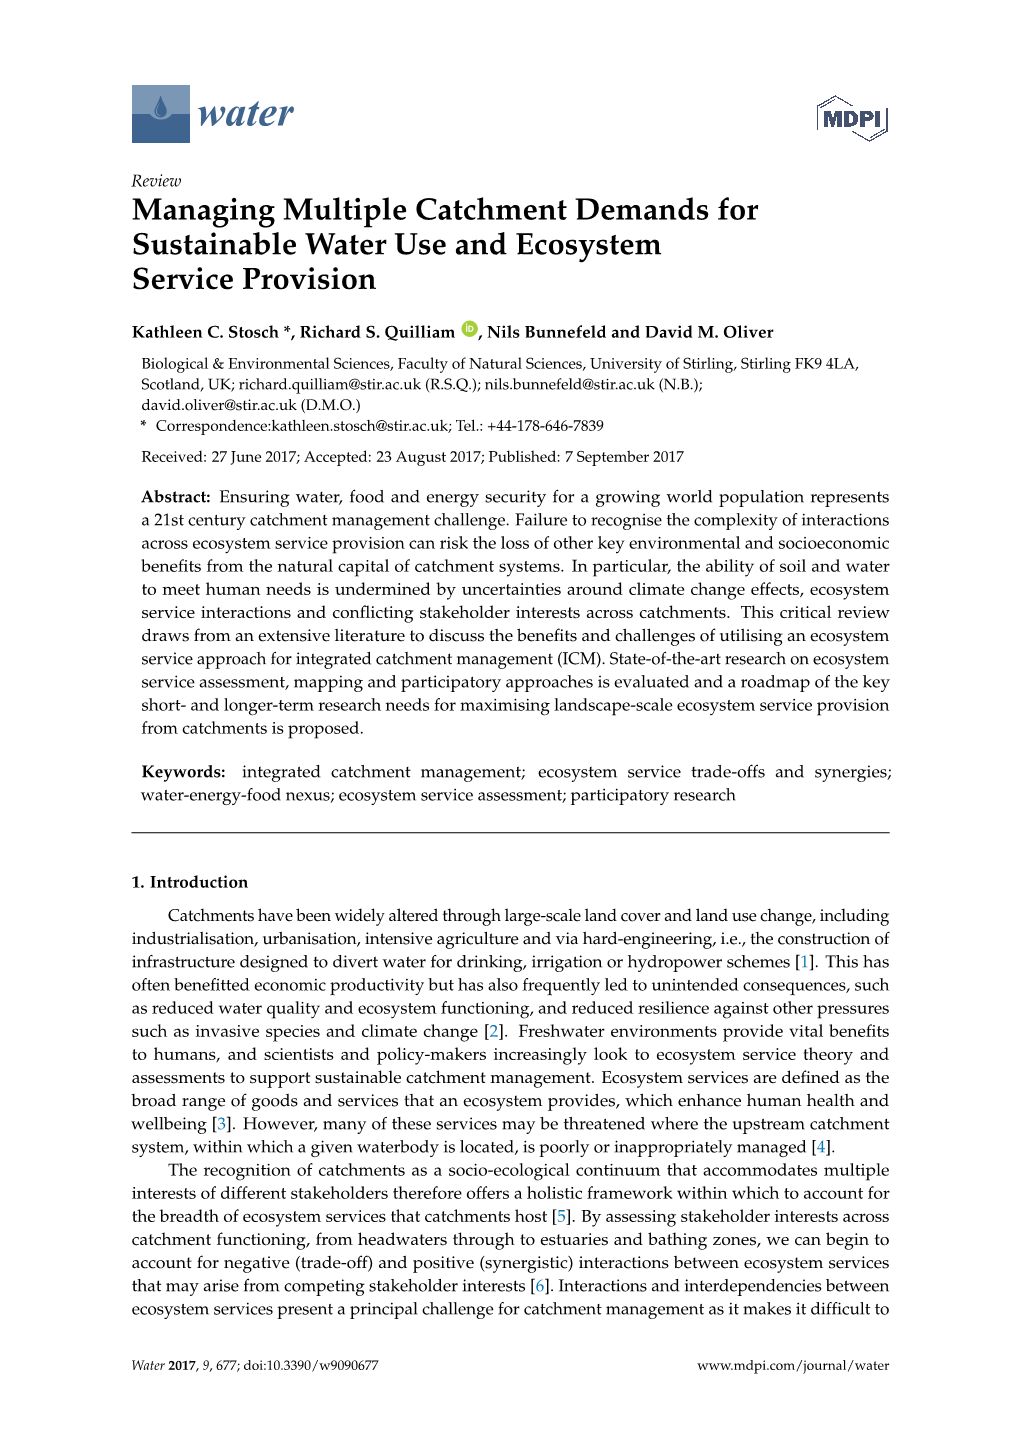 Managing Multiple Catchment Demands for Sustainable Water Use and Ecosystem Service Provision